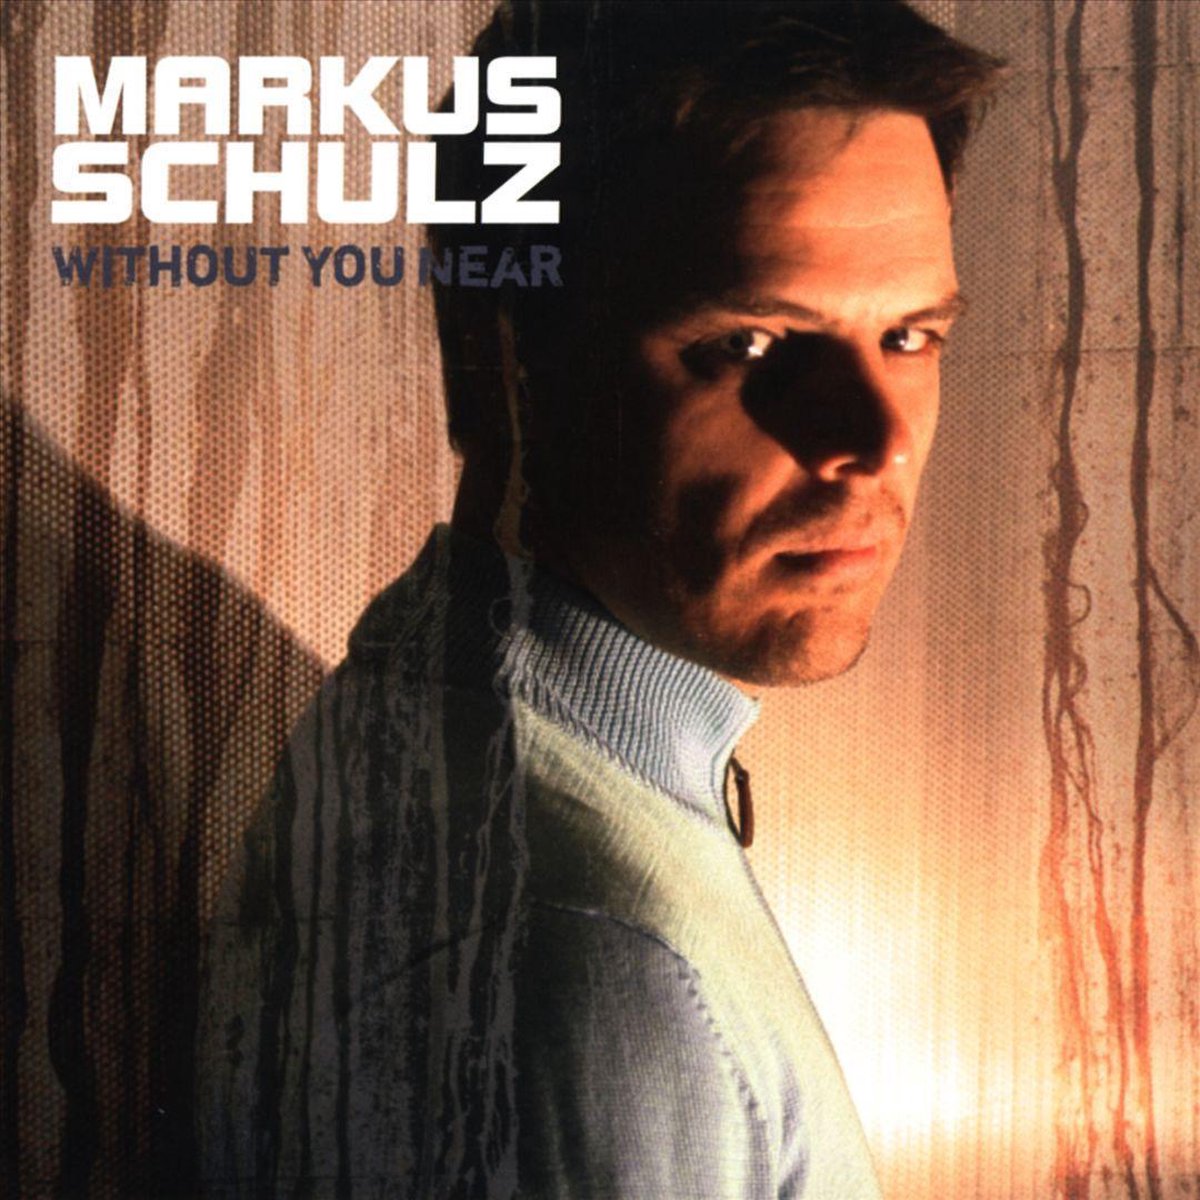 Without You Near - Markus Schulz